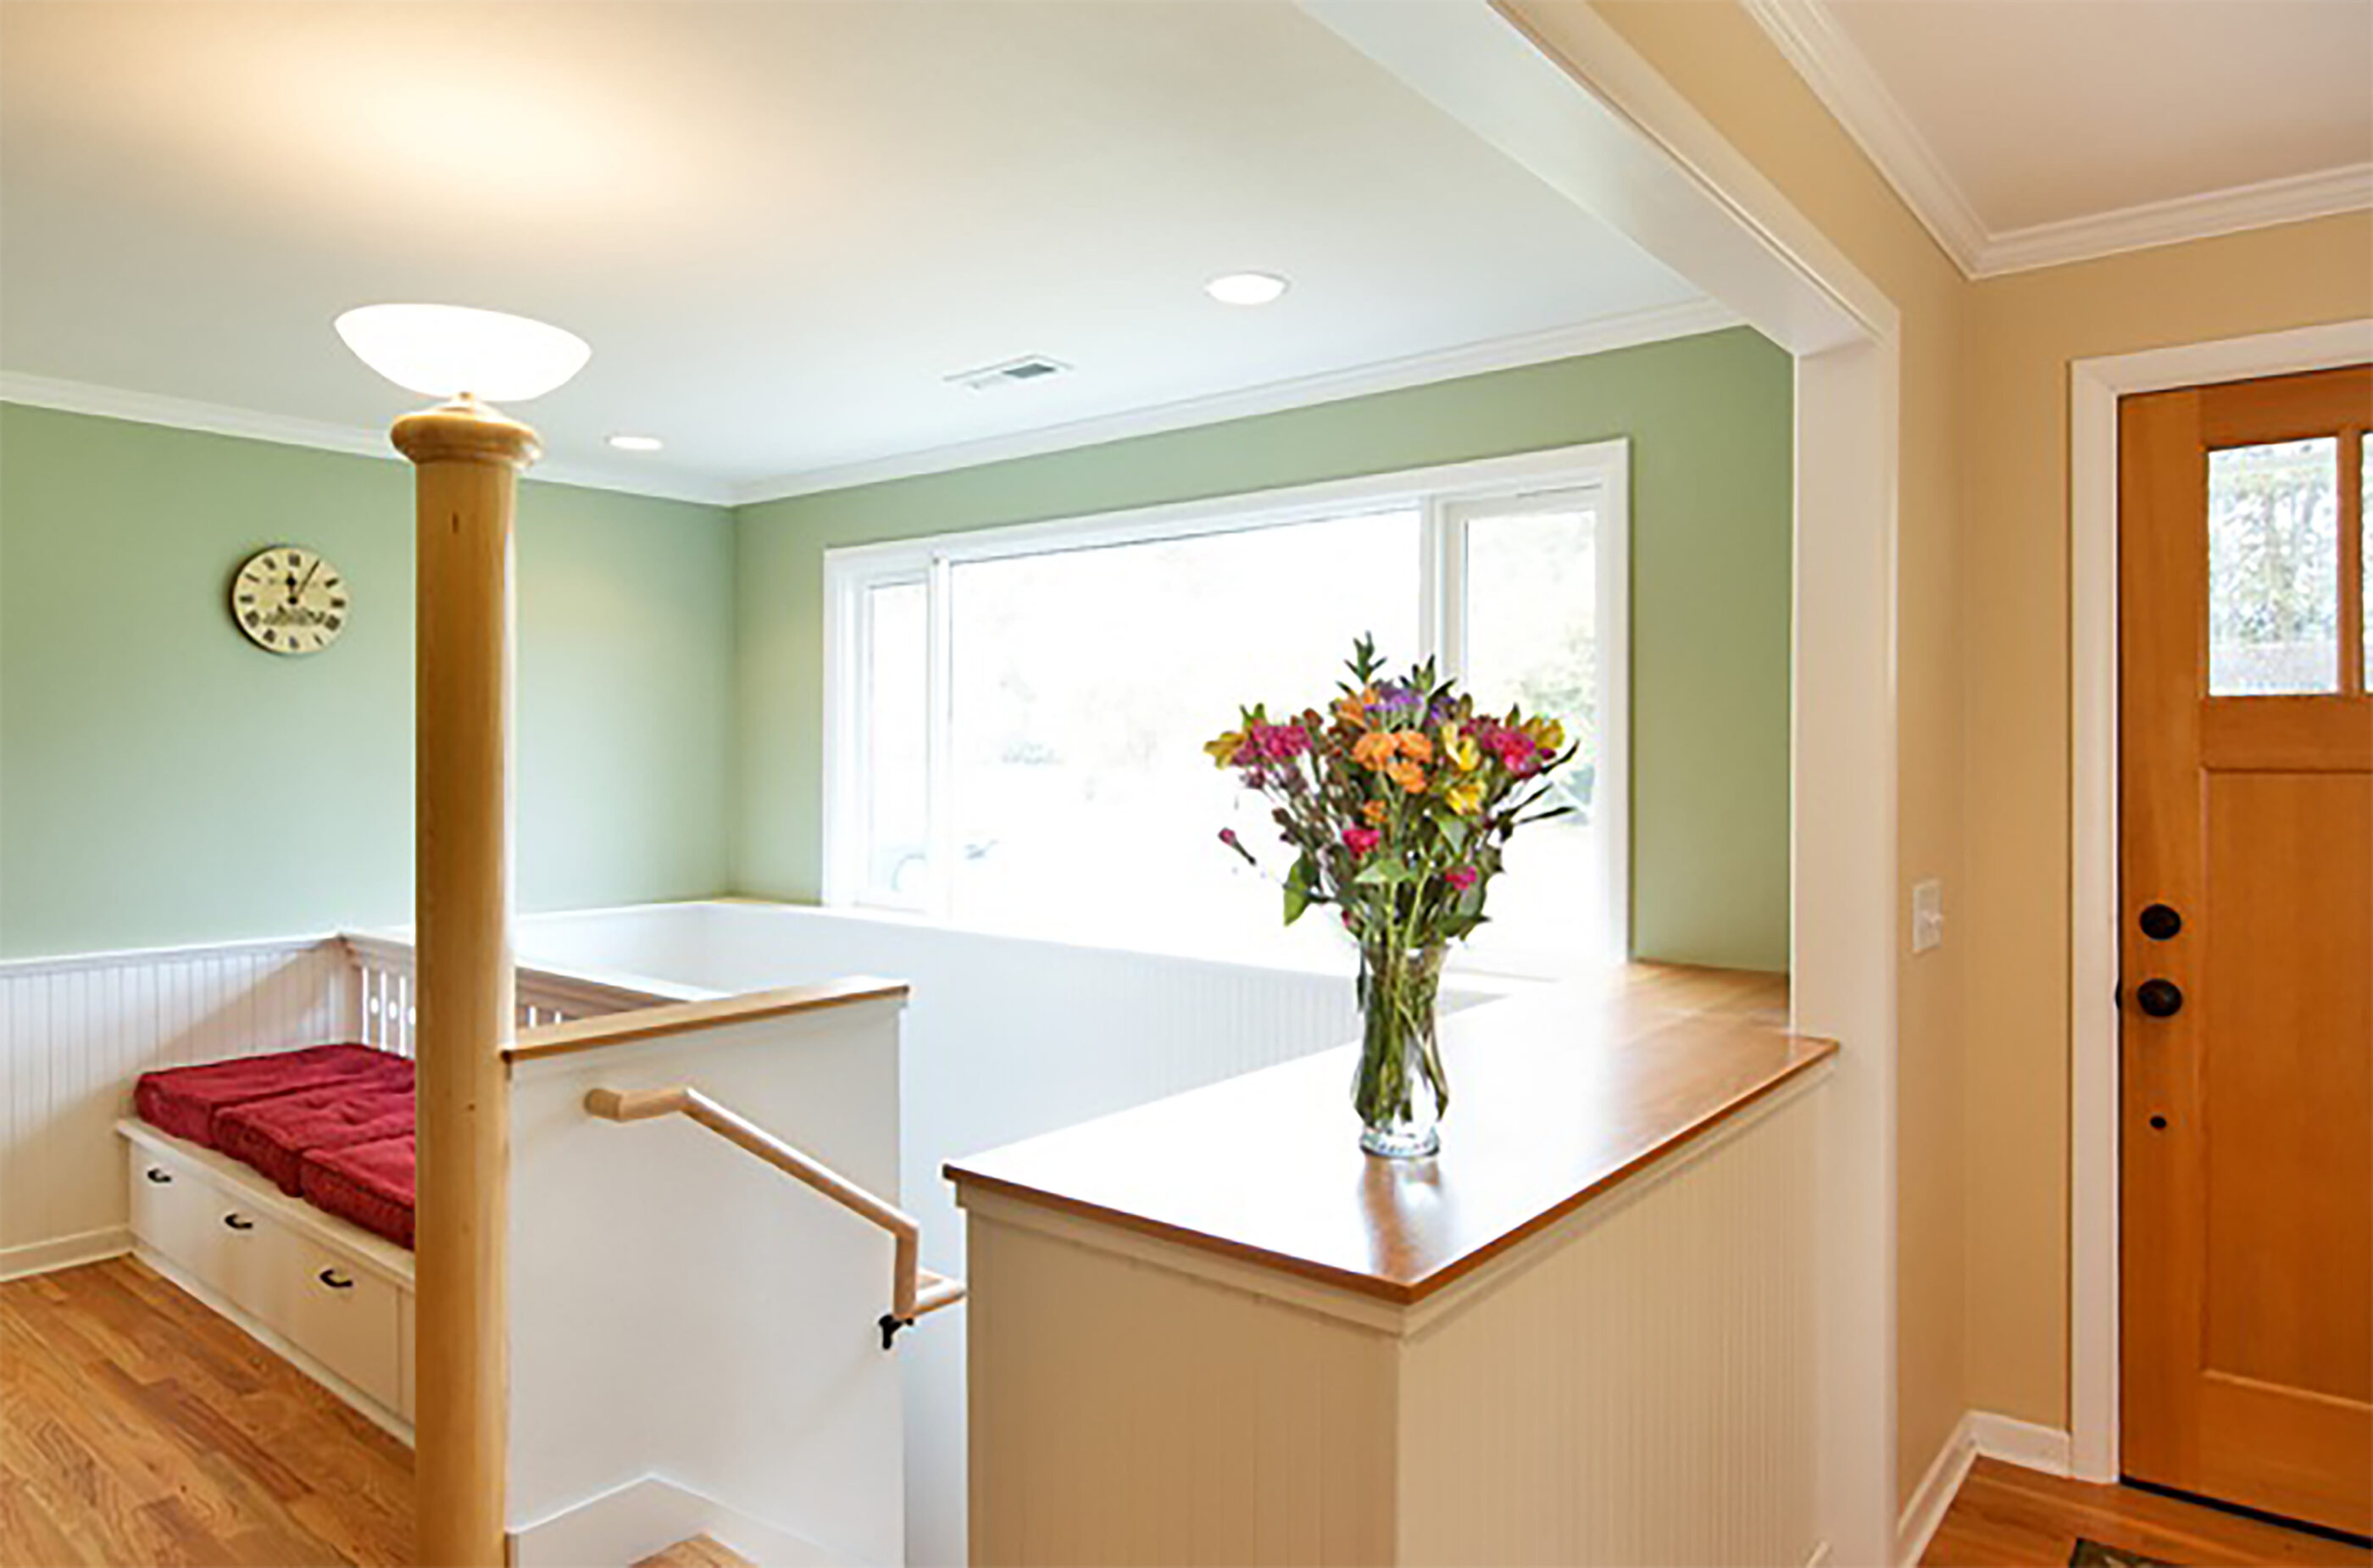 Finishing touches in this eco-friendly renovation include a custom newel lamp post, hand crafted trim.